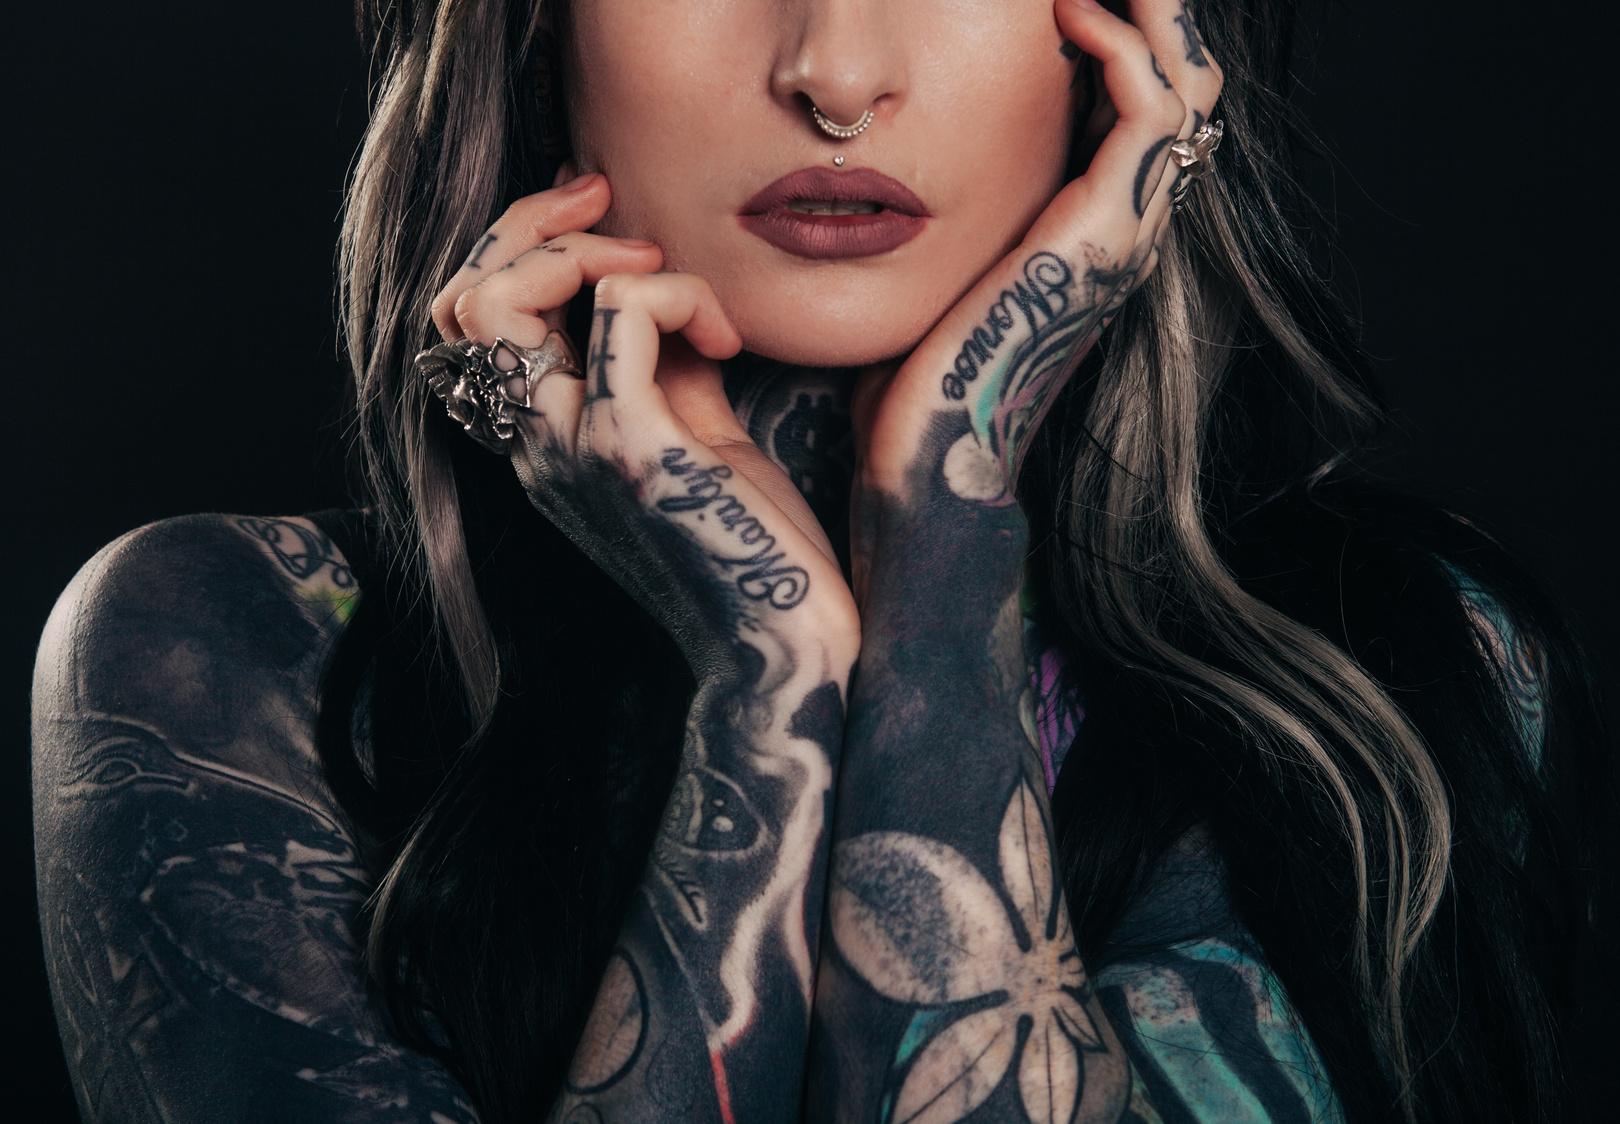 Using recognizable attributes of a person, such as tattoos, without their consent to advertising